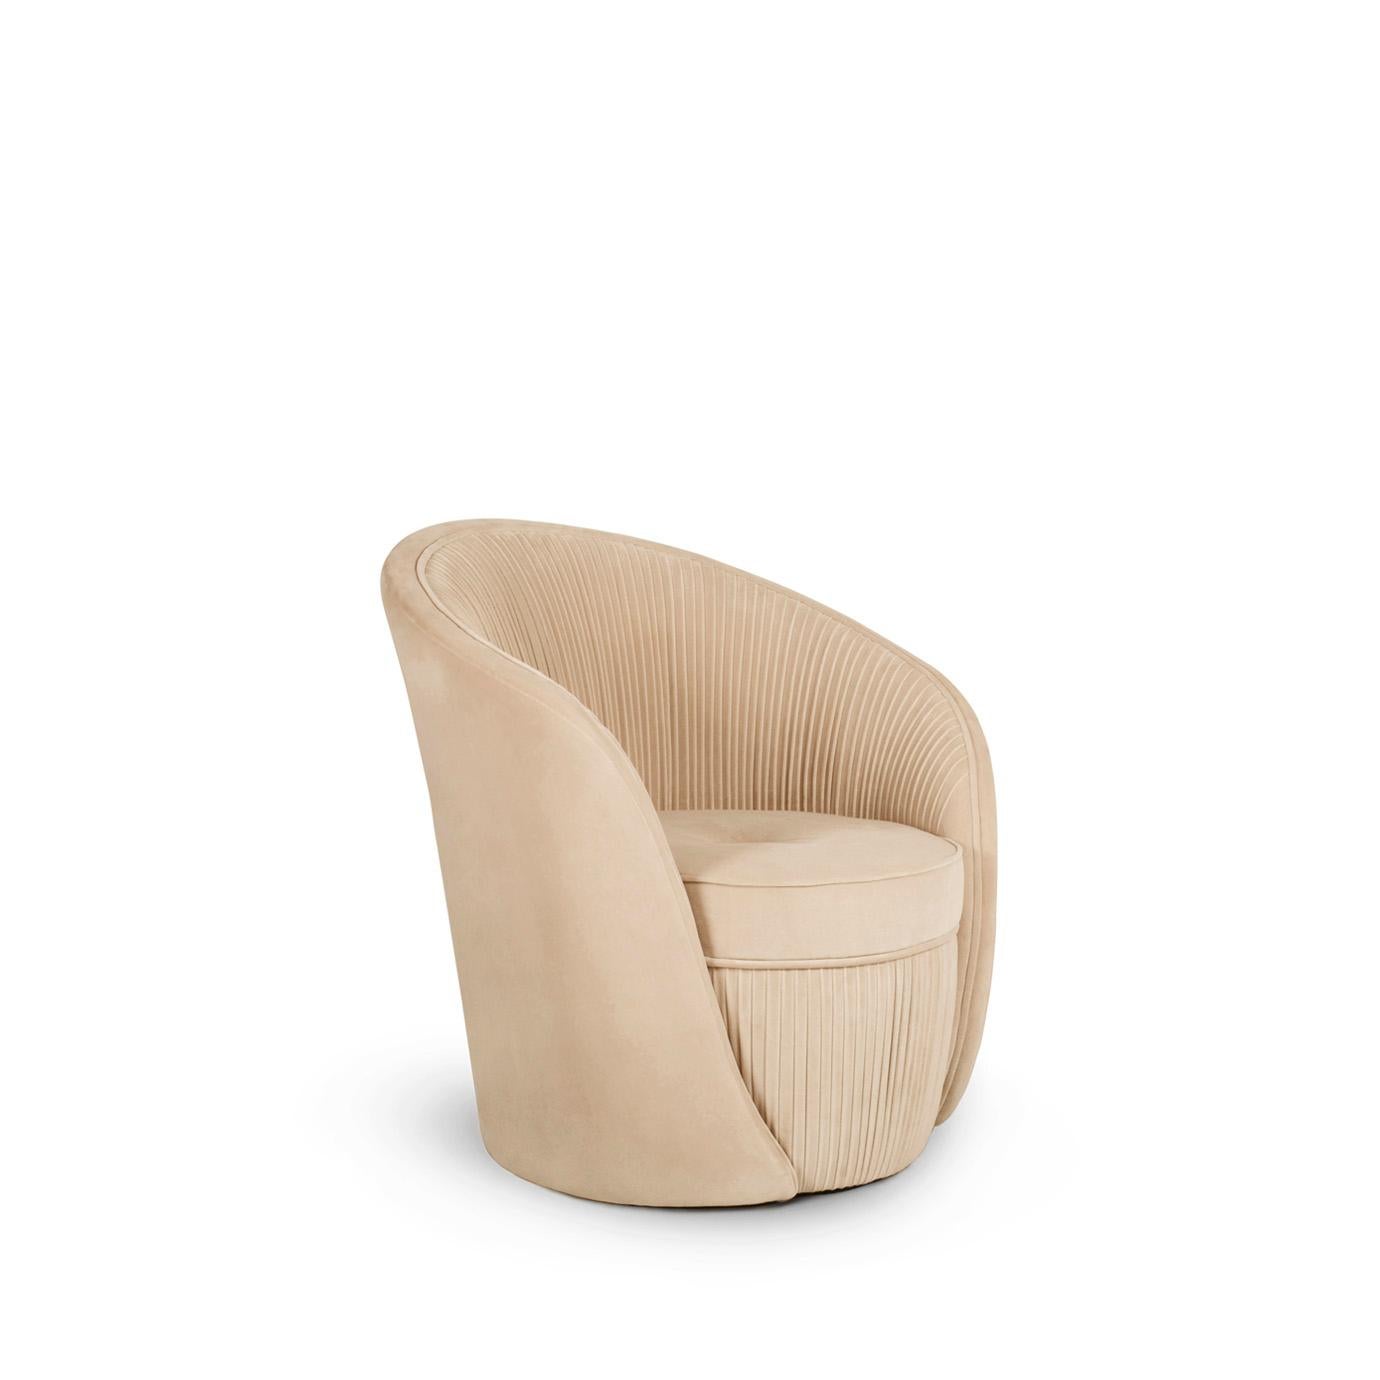 Wrap yourself in a soft flower petal and revel in the fluidity of graceful lines gently curving around your body. A fresh new take on femininity, the Bloom chair was inspired by the tenderness of the prettiest Calla Lily floret and designed by